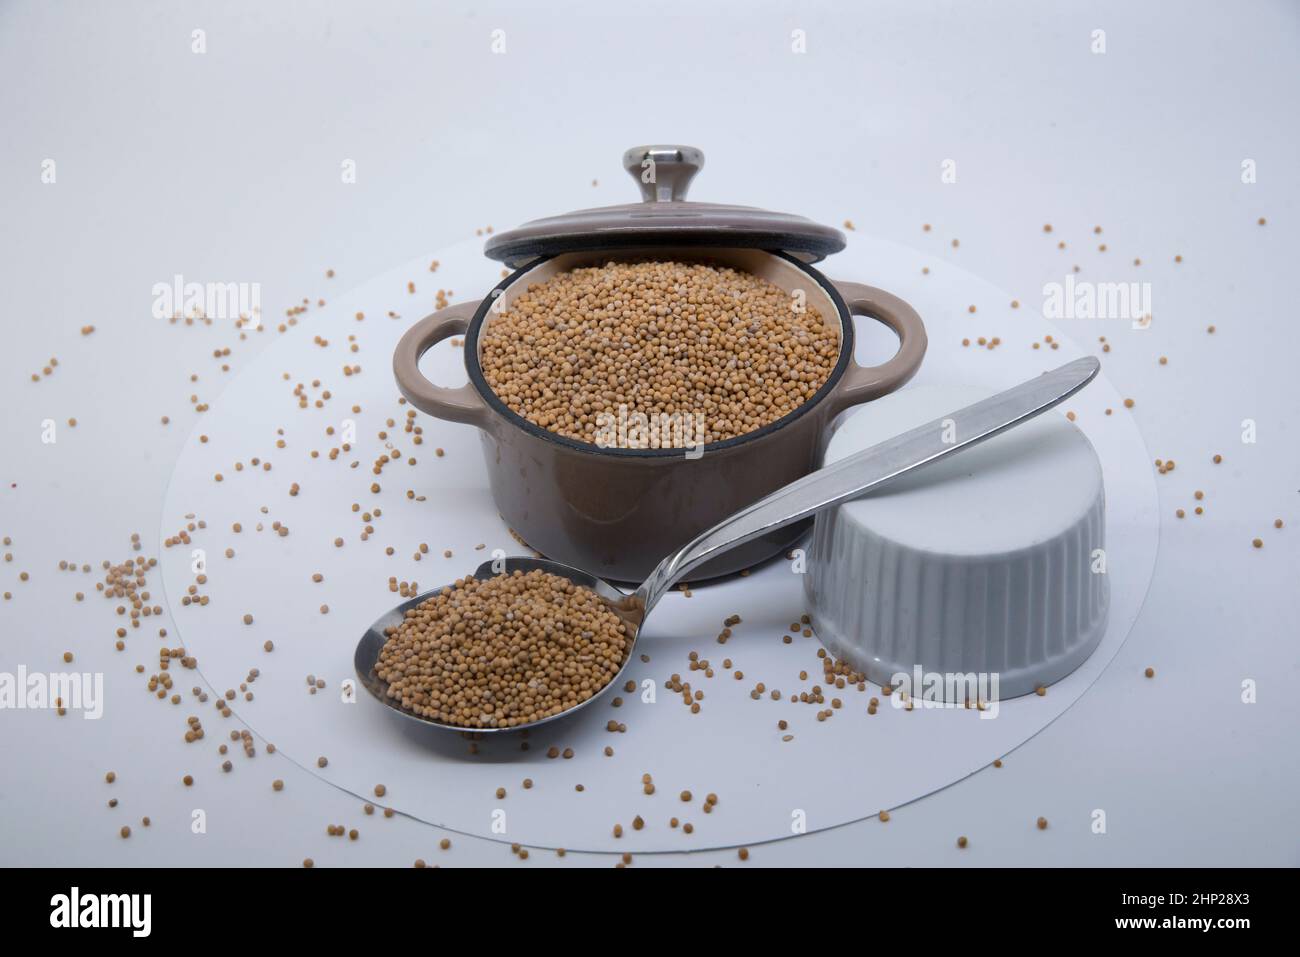 mustard seeds in a kitchen, a spice used for cooking Stock Photo